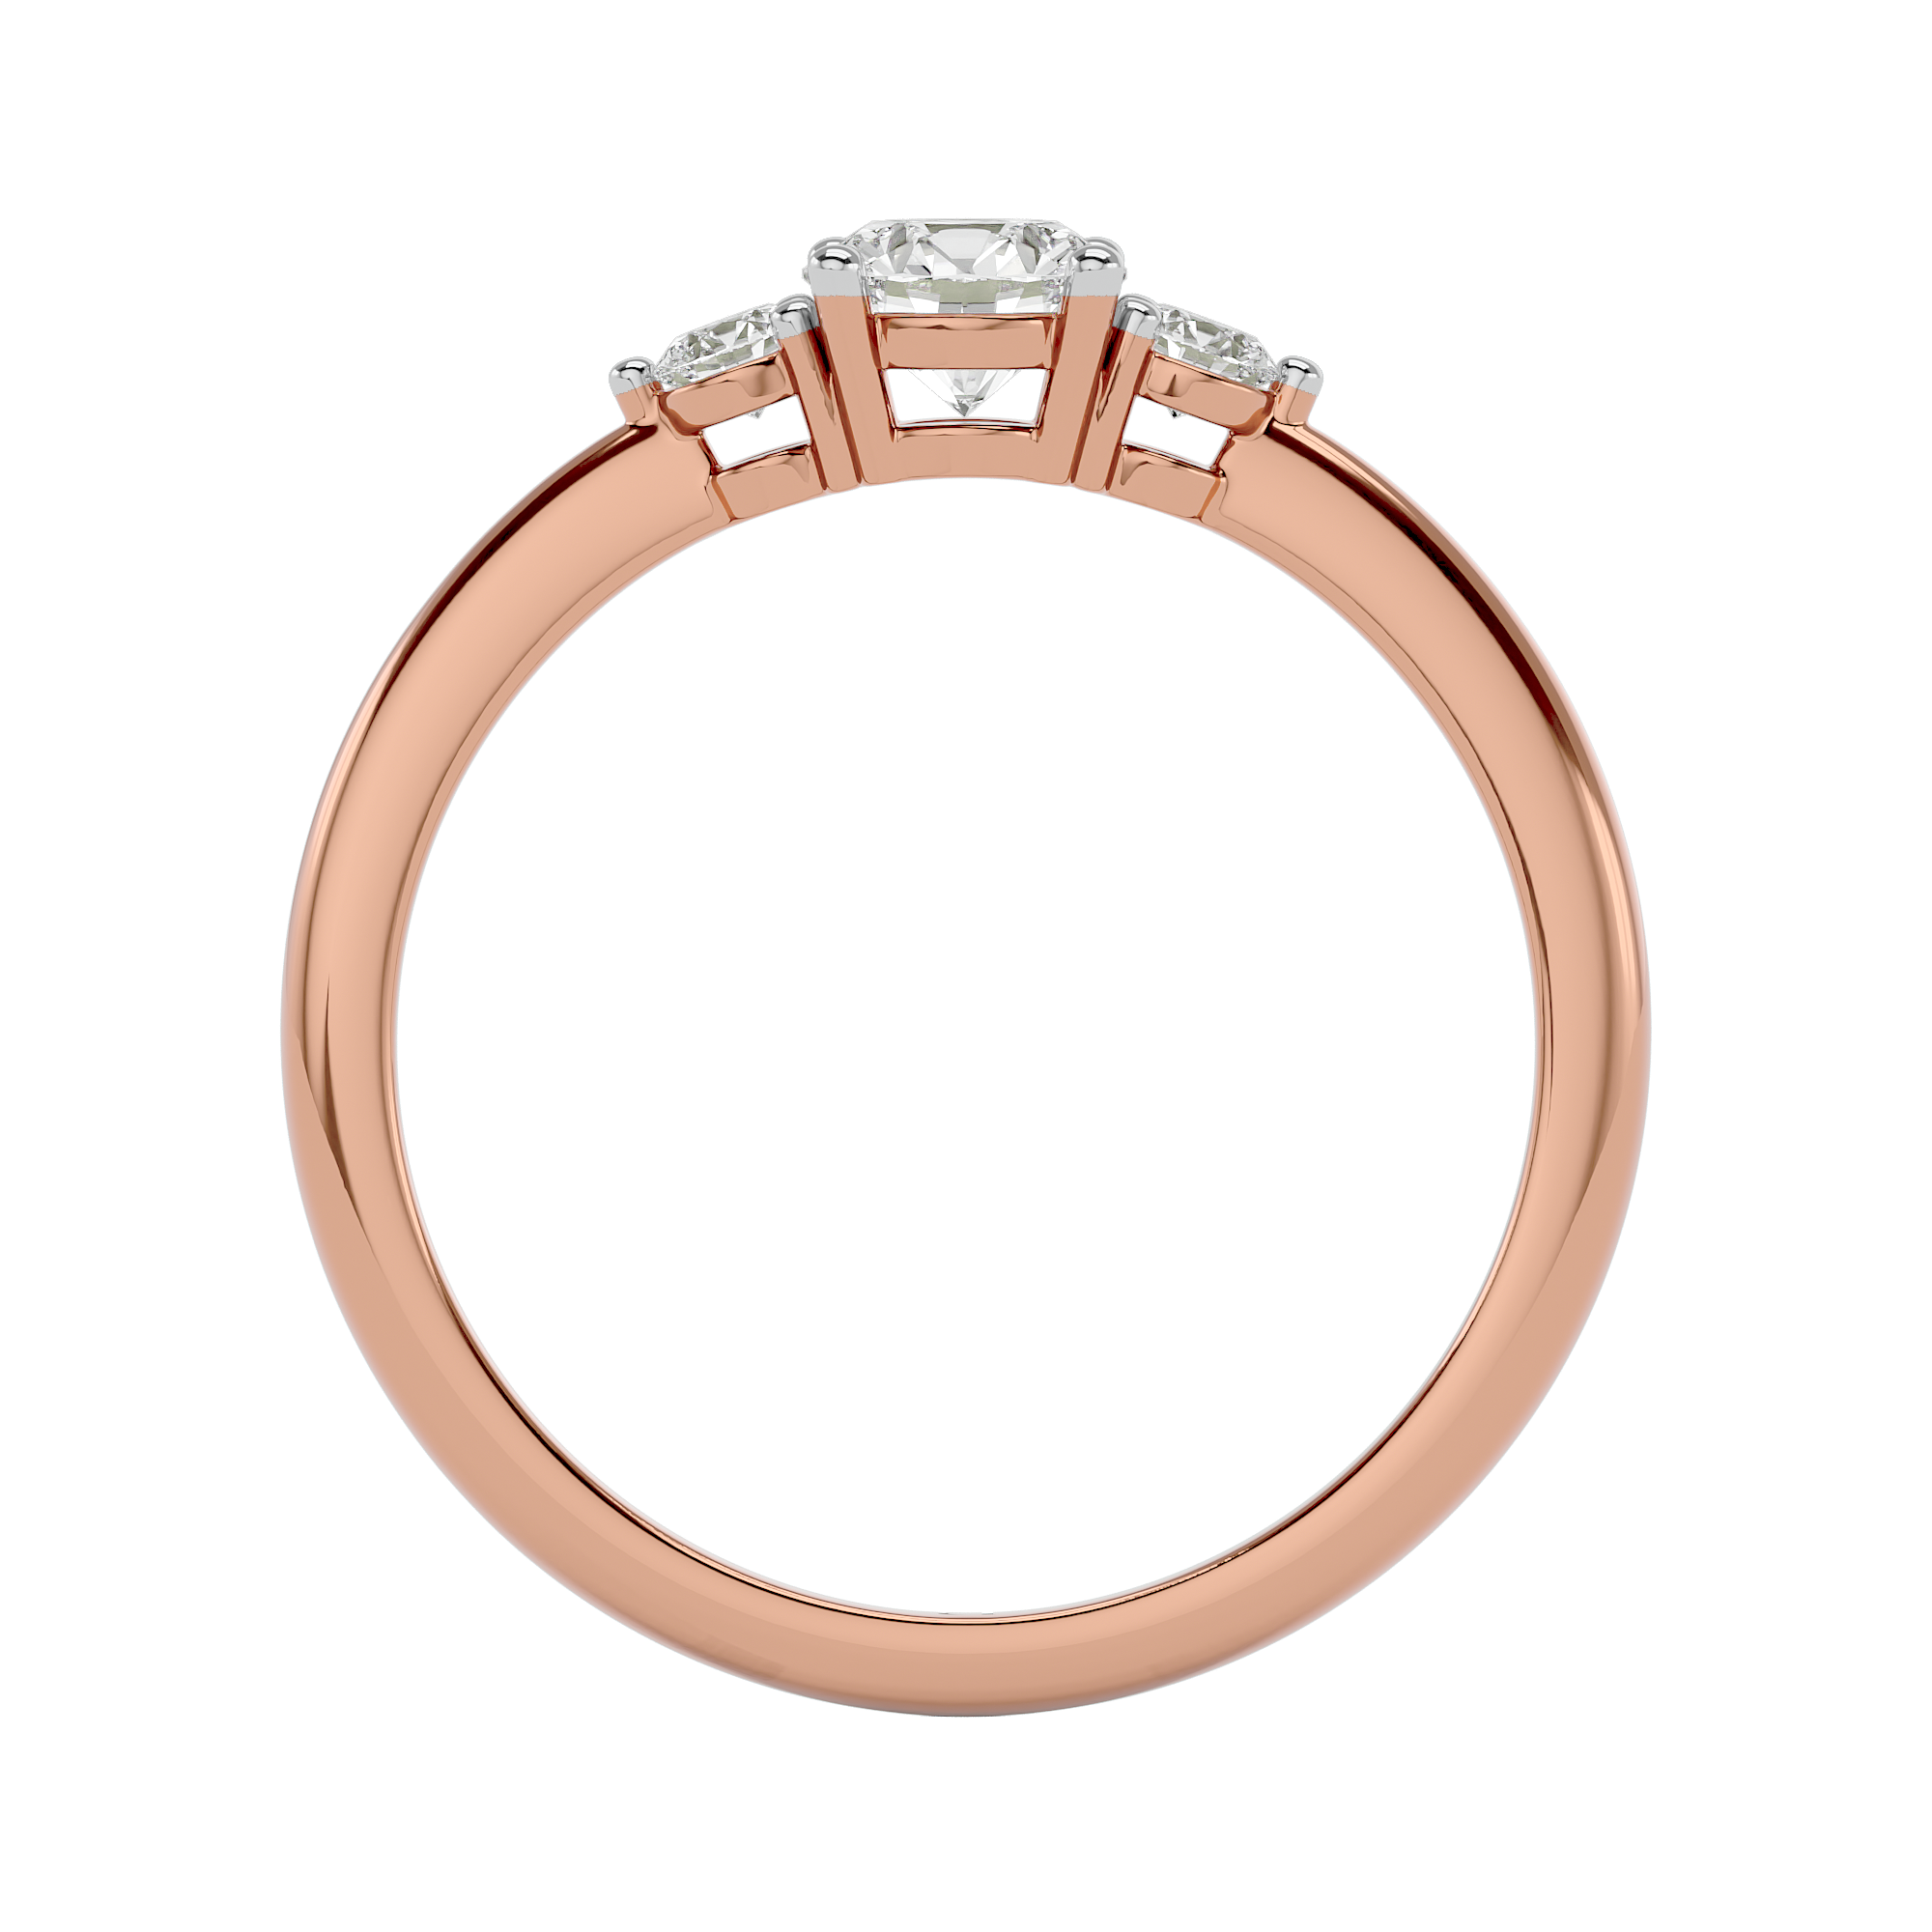 14Kt rose gold diamond solitaire ring by Blu Diamonds